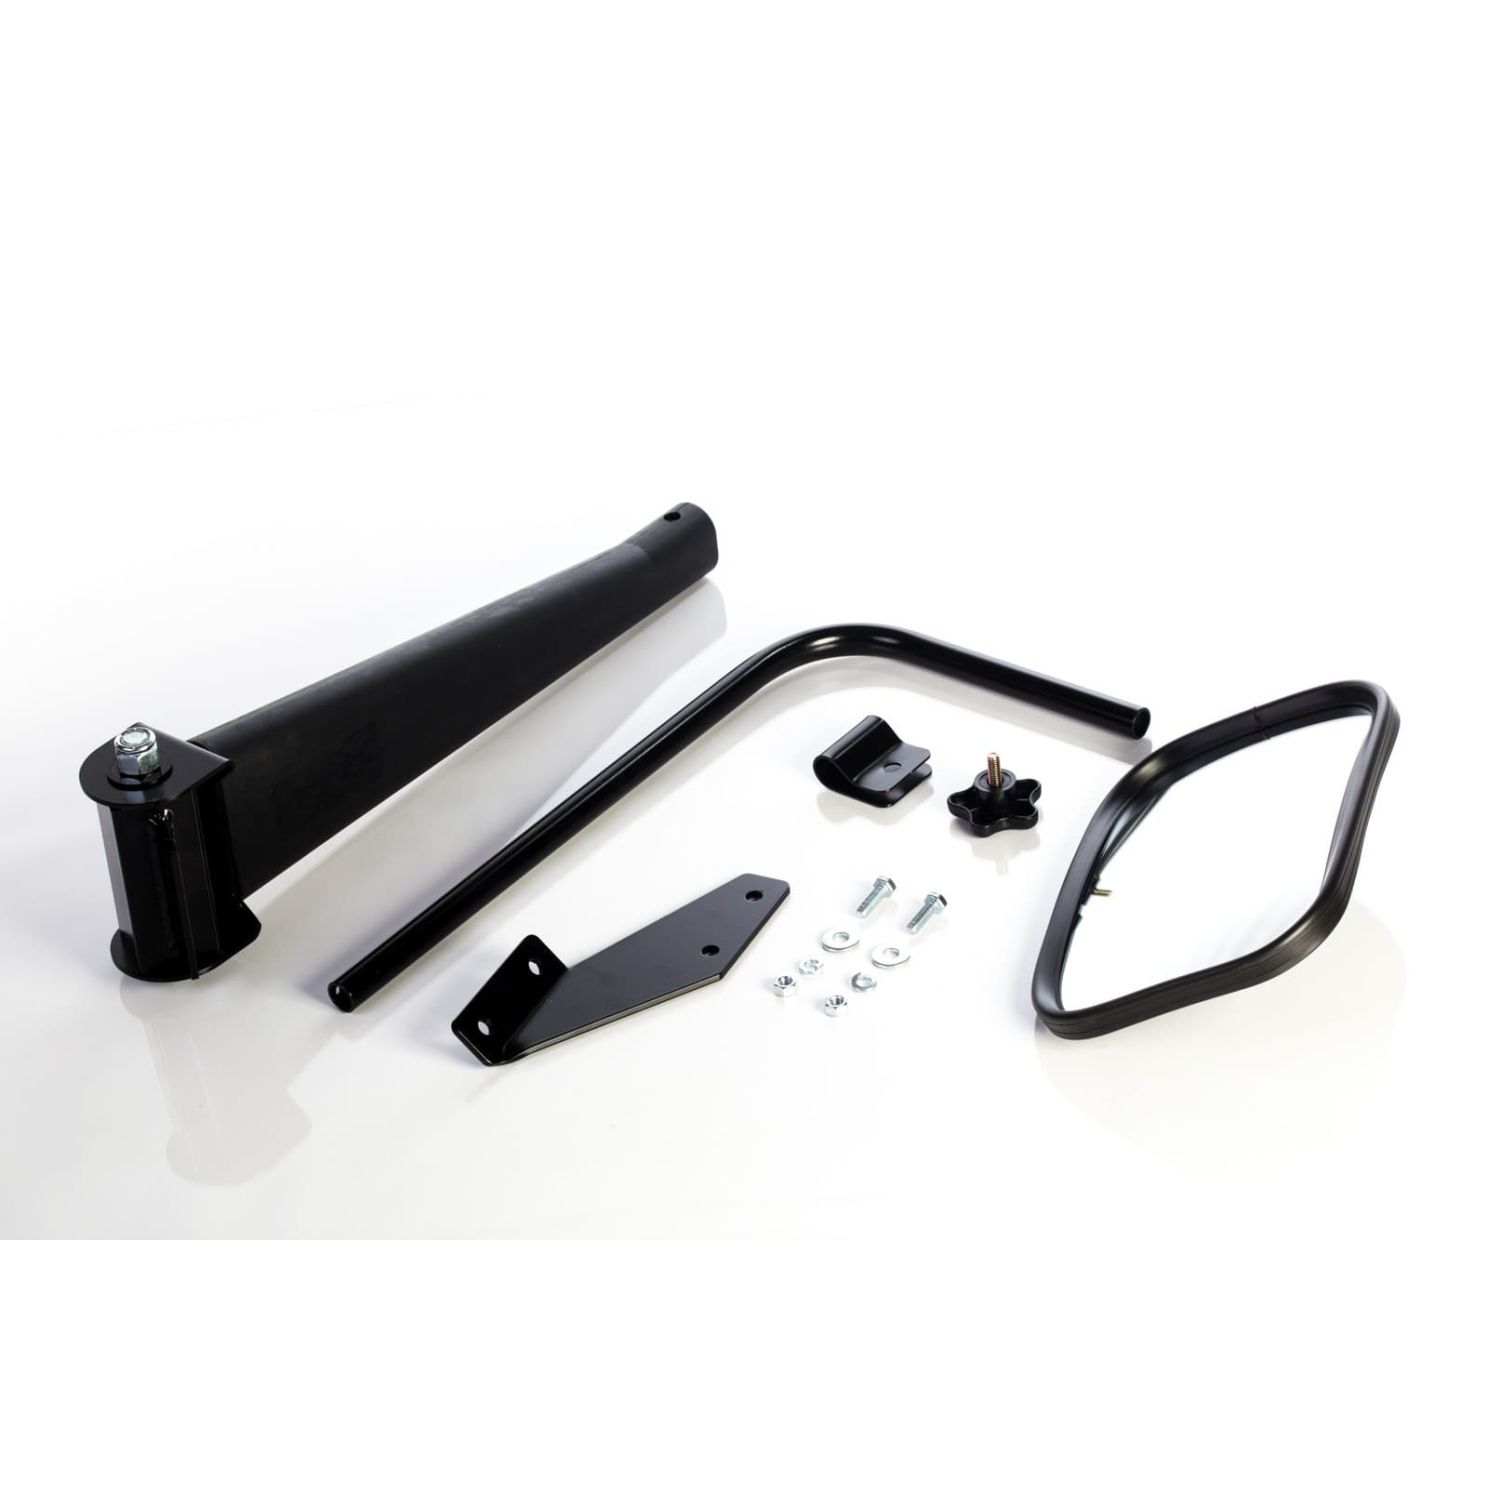 K&M Left Hand Wide Angle Extension Mirror Kit 3166